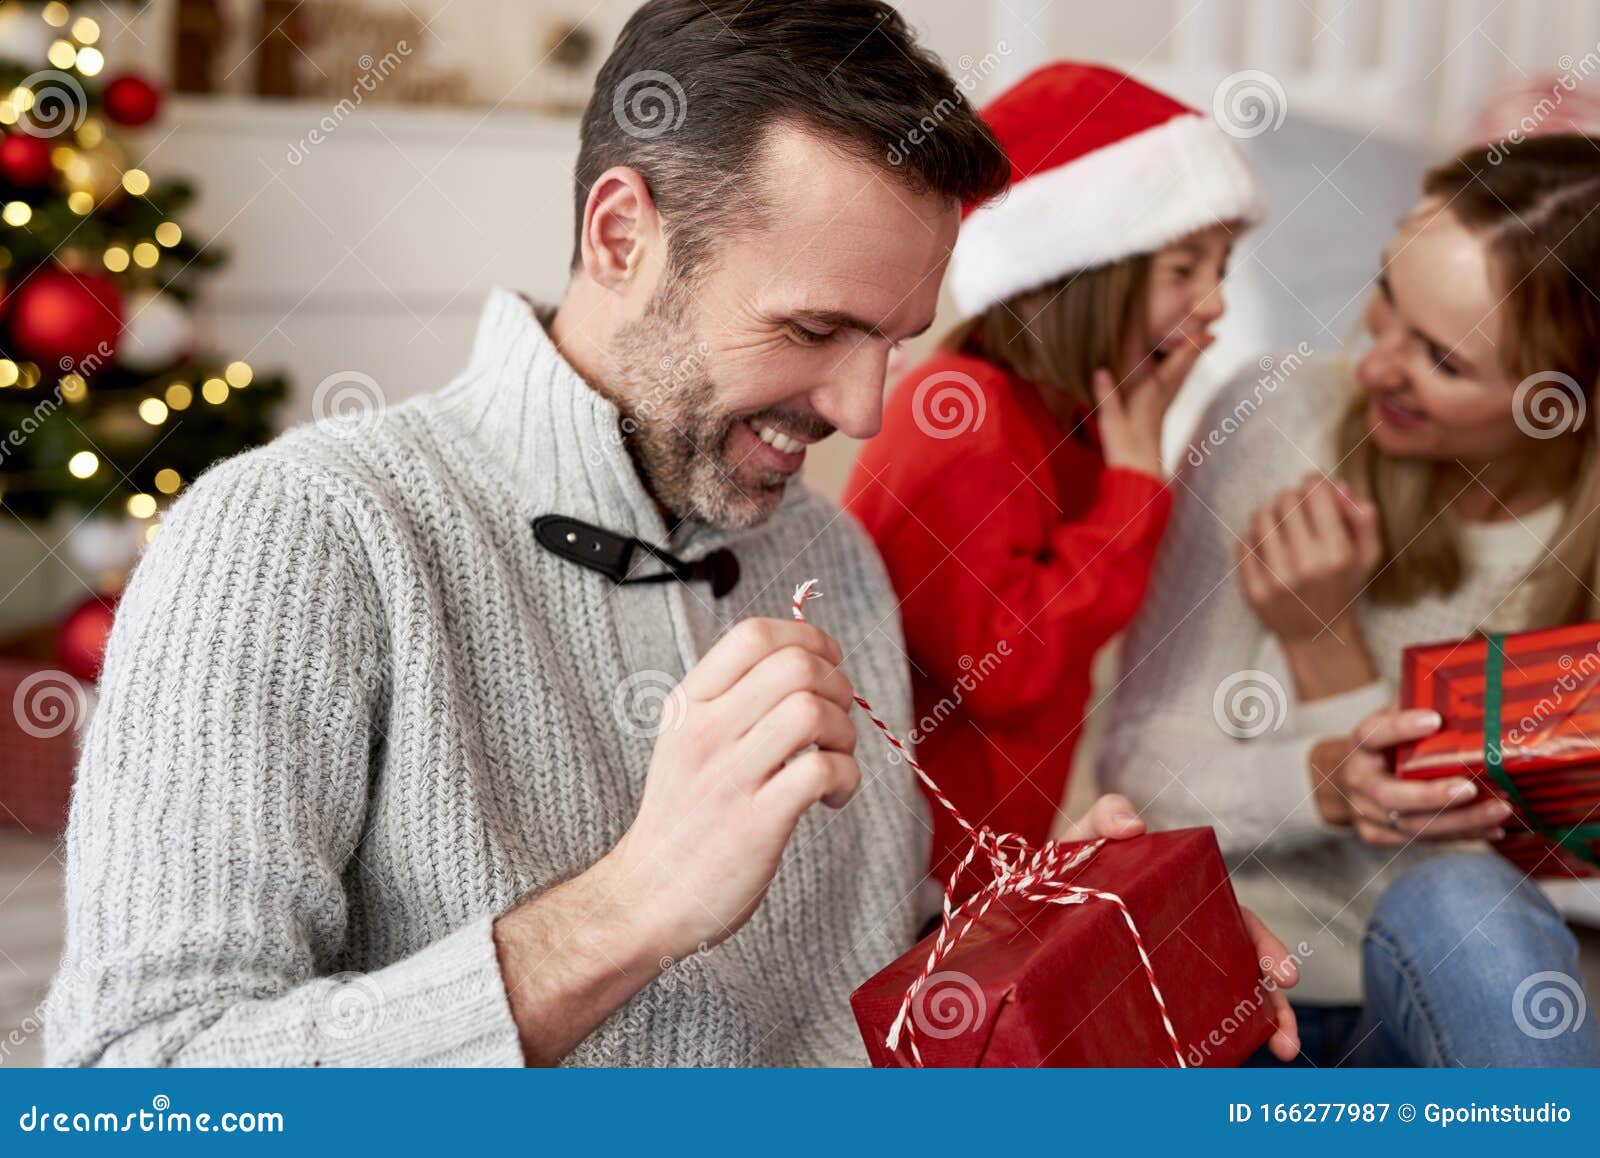 Happy Man Opening Christmas Present Stock Image Image Of Christmas Indoors